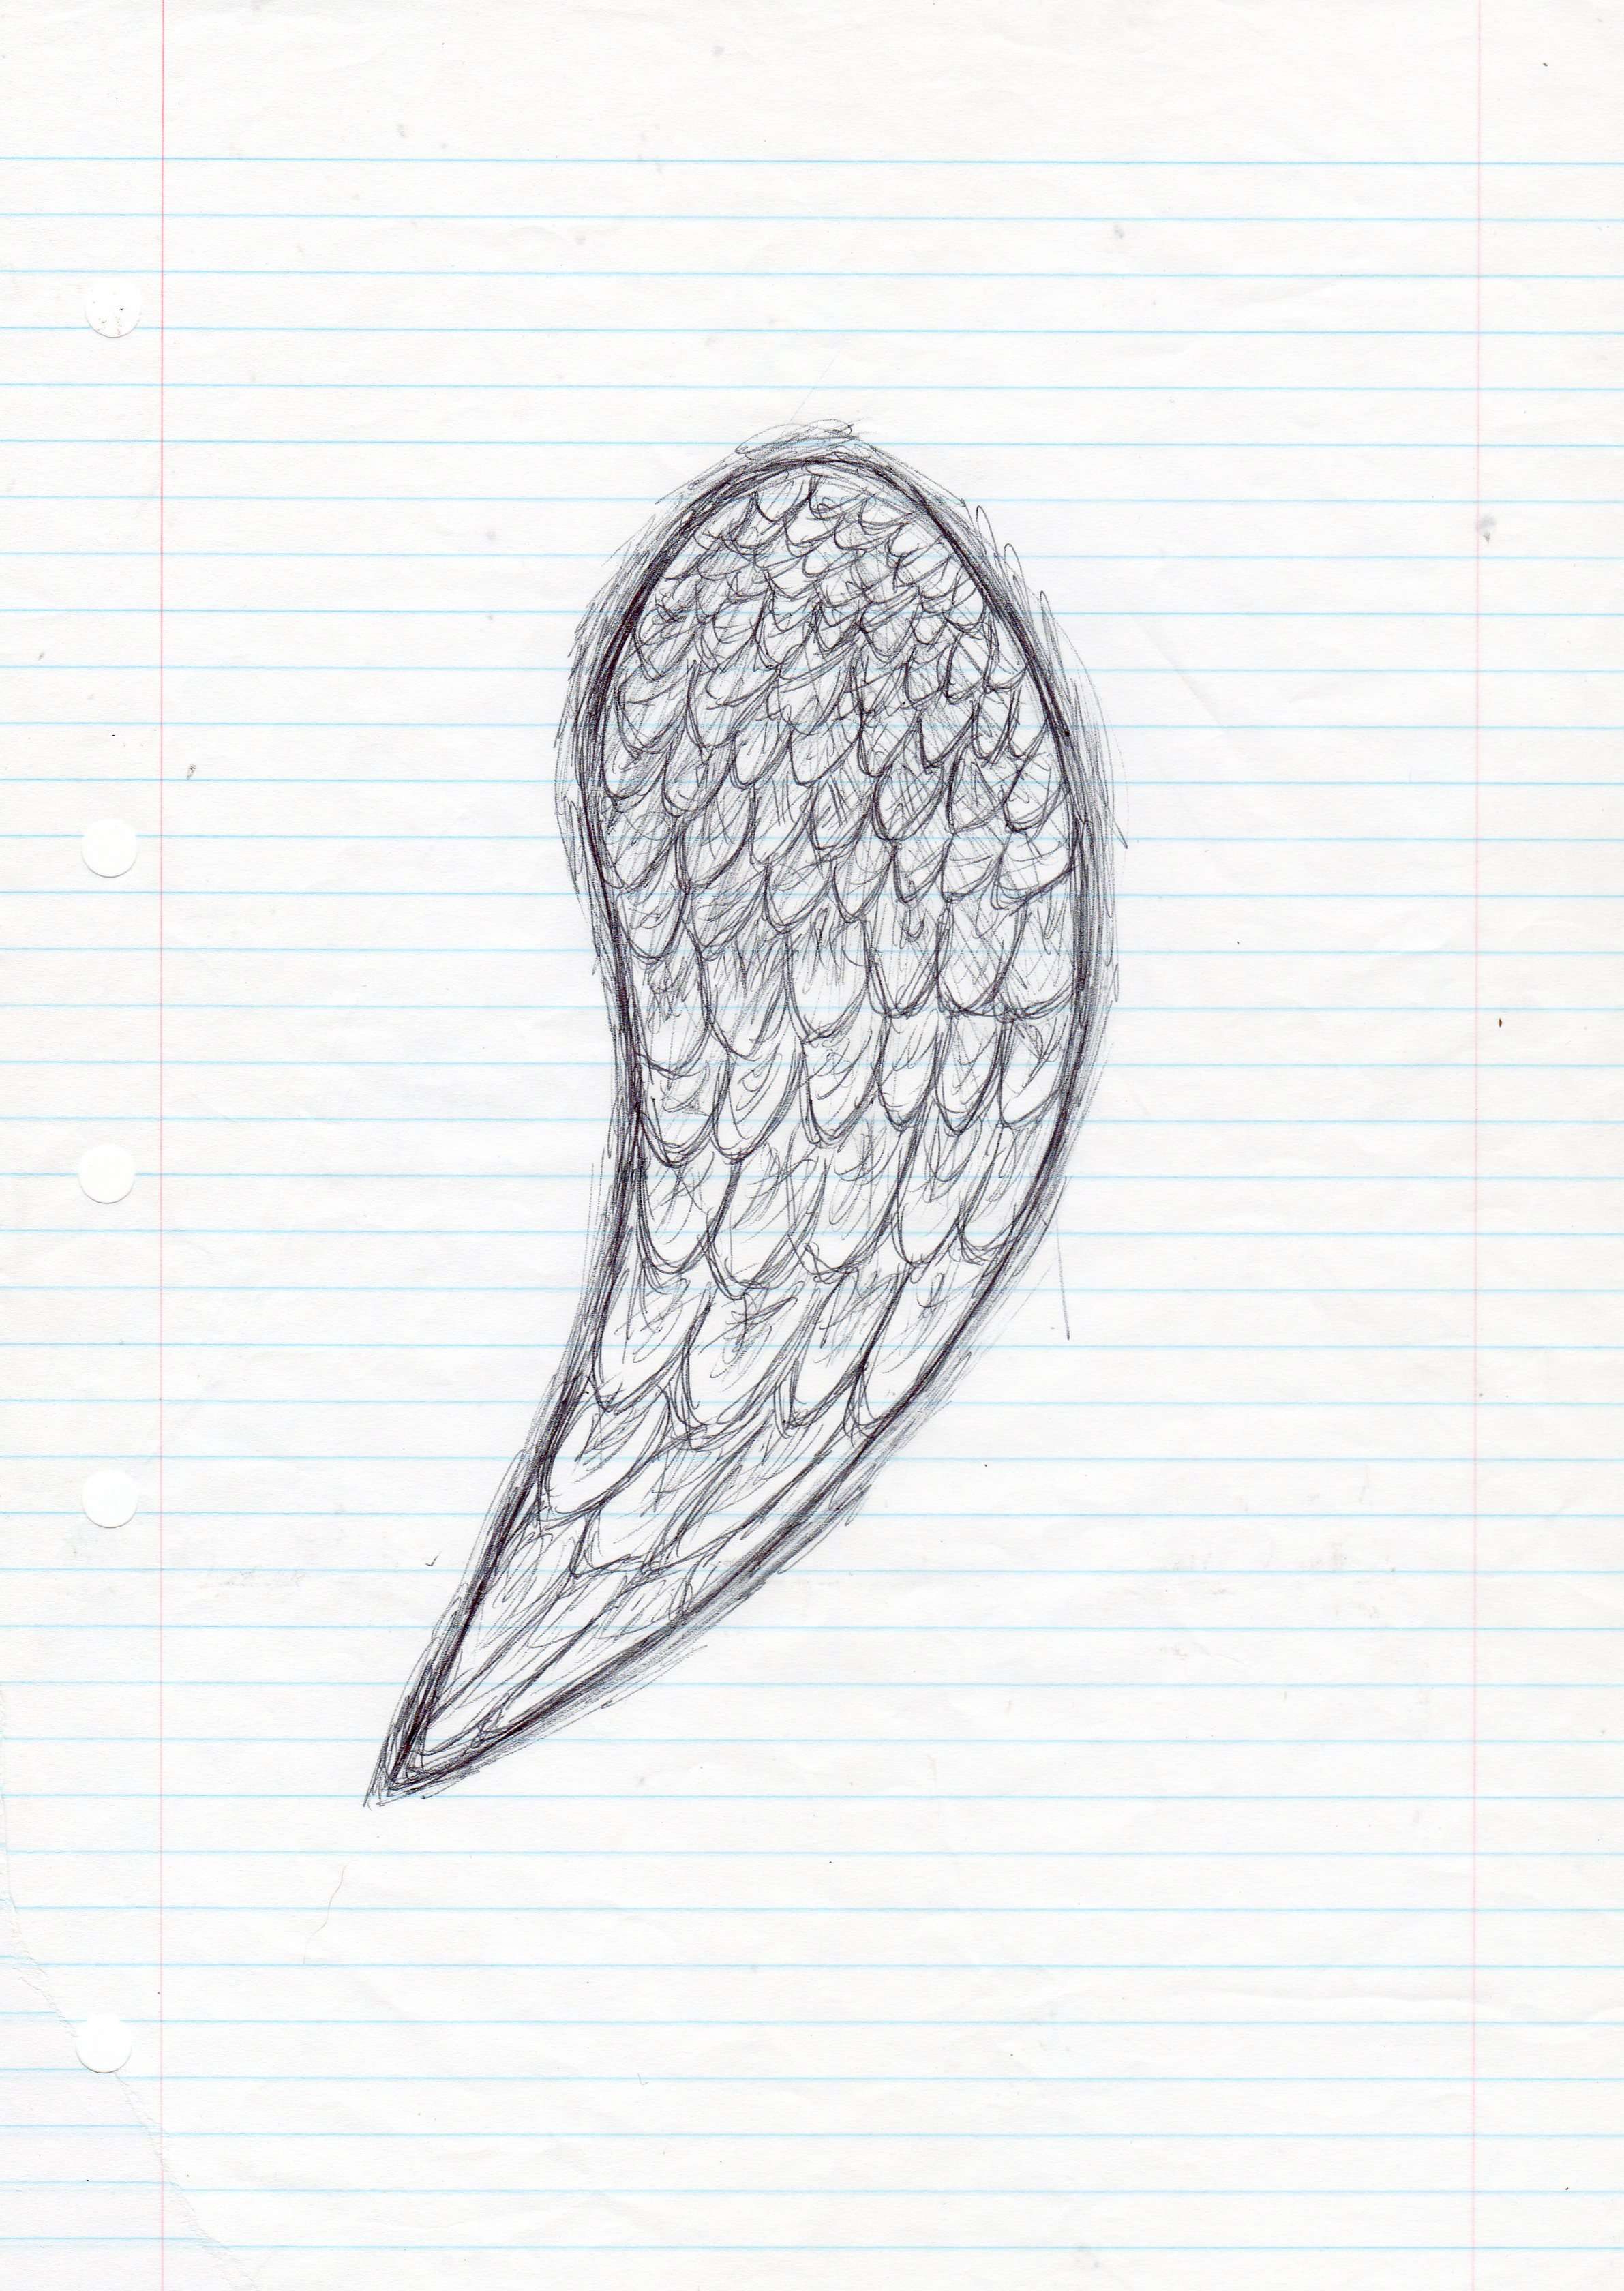 Curved angel wing drawing